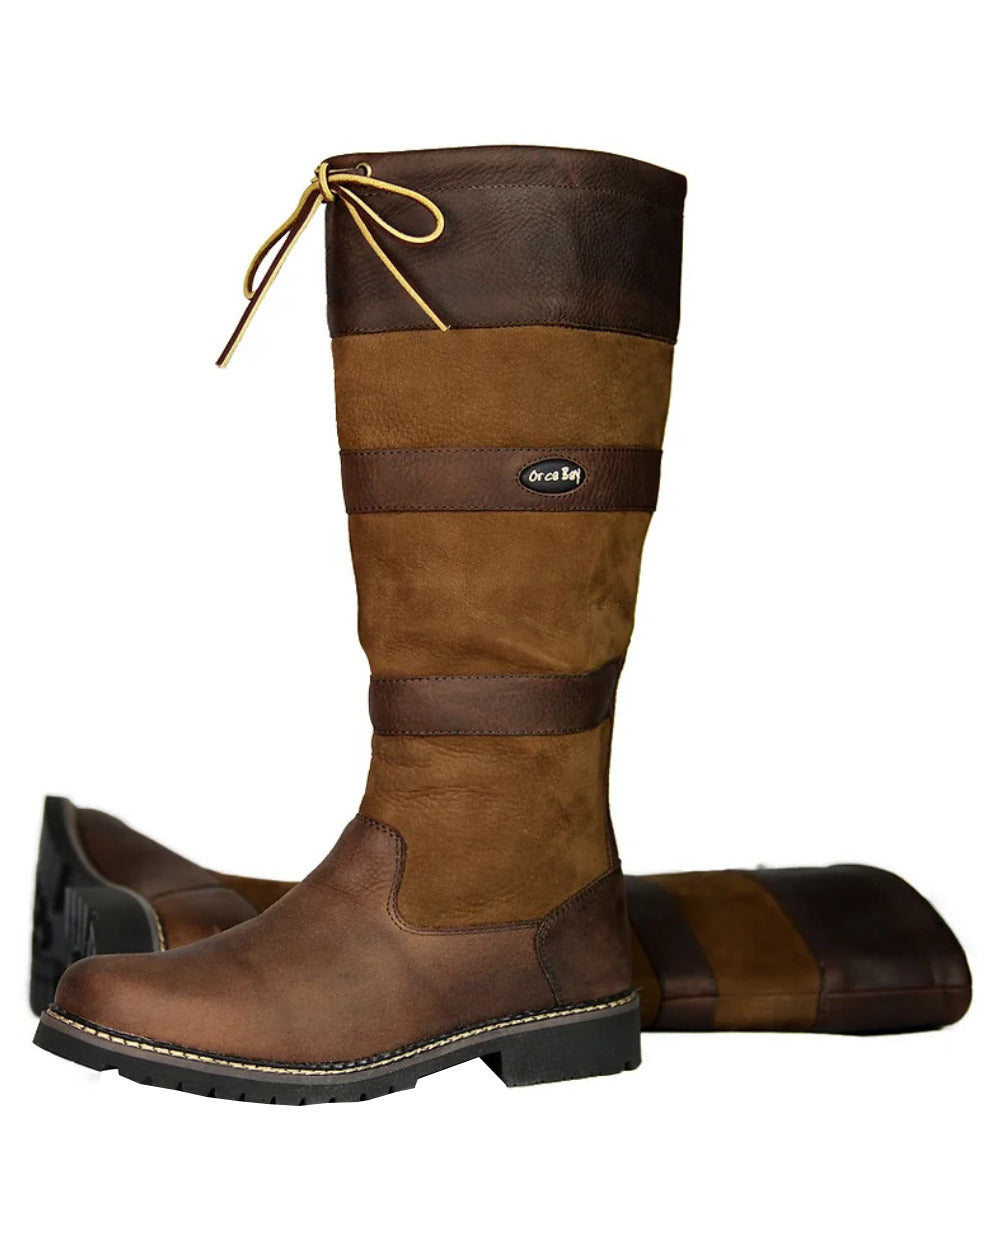 Brown Coloured Orca Bay Orkney S-Fit Country Boots On A White Background